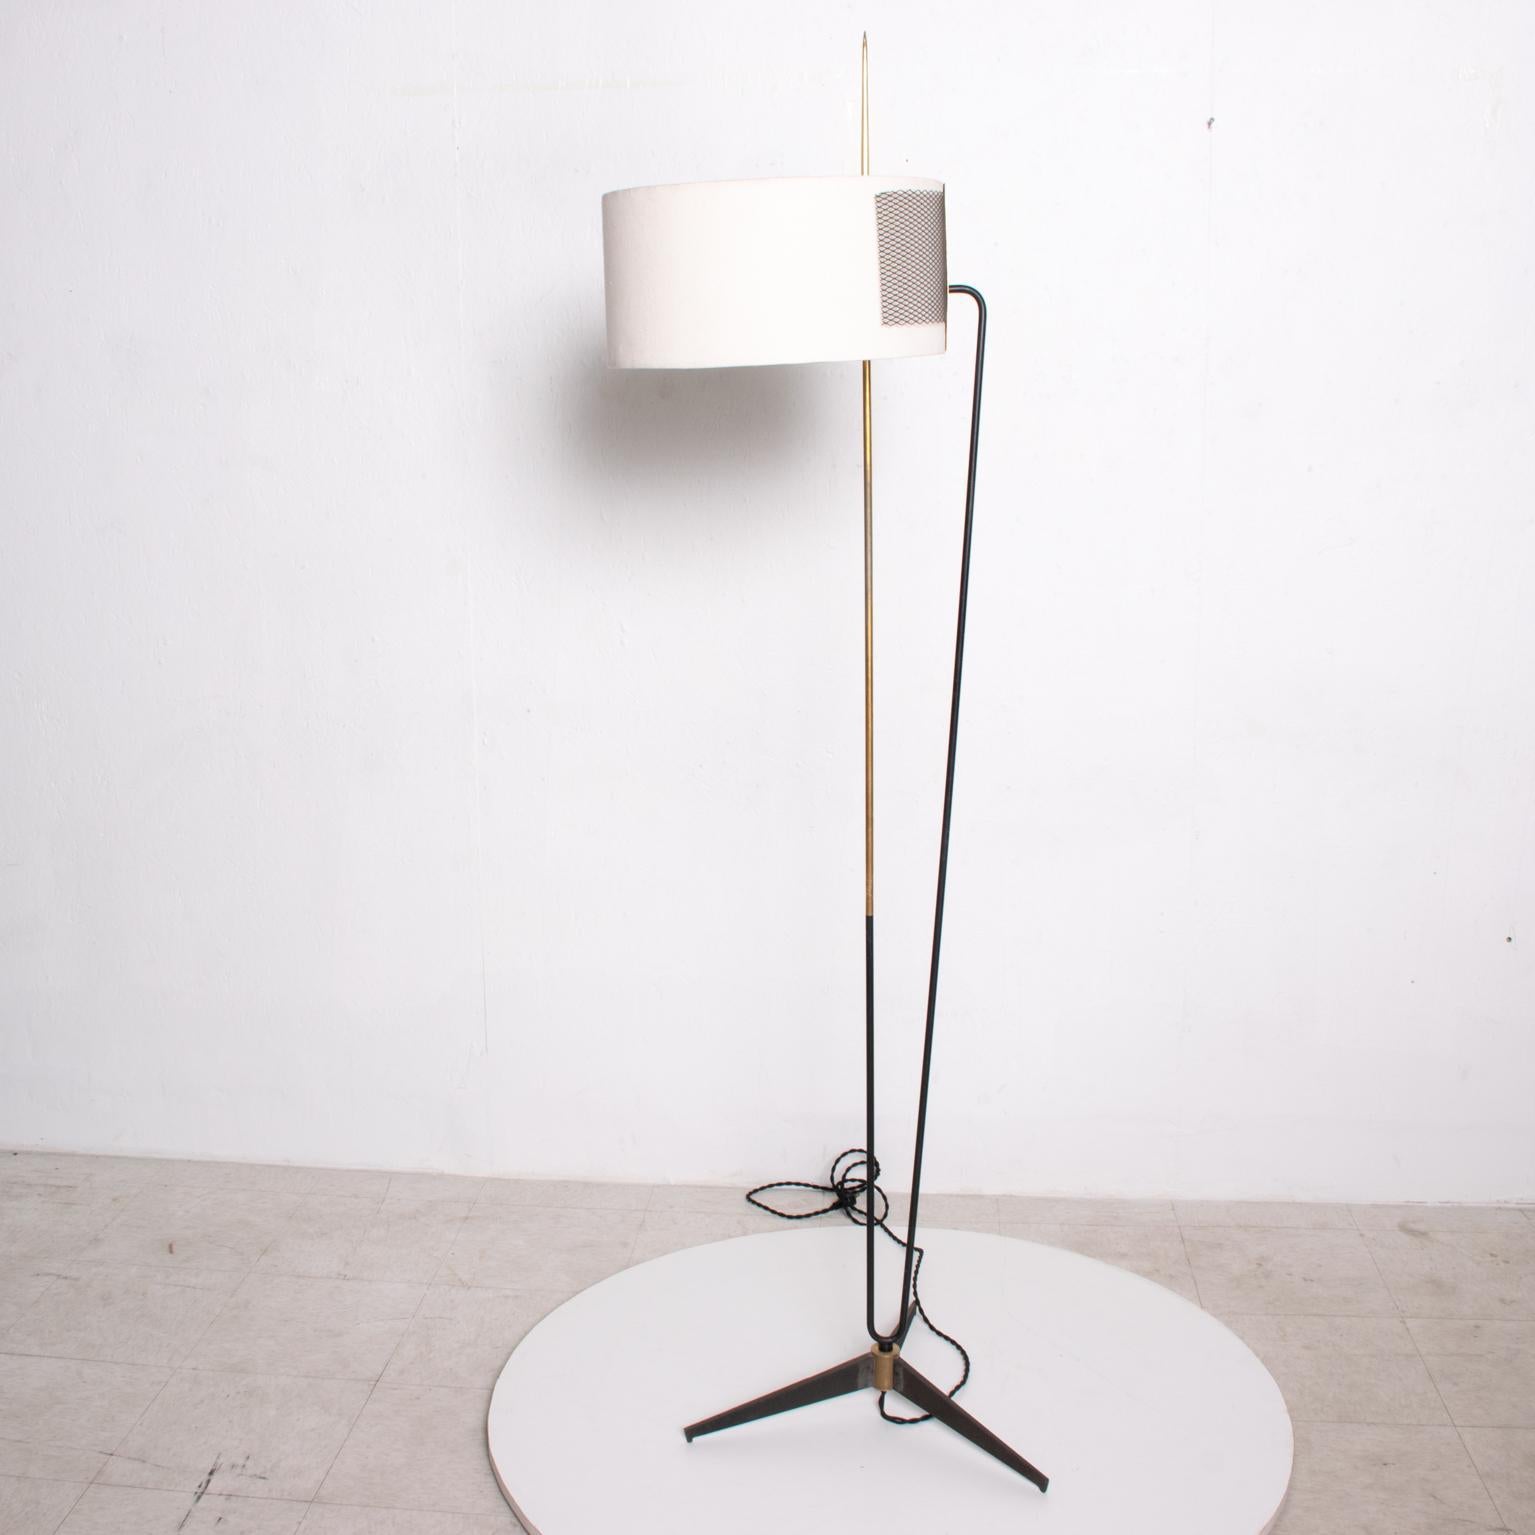 For your consideration, a beautiful tripod floor lamp made in France circa the 1950s. Produced by Arlus. Magnificent design with a unique tripod base, sculptural body in tubular steel and bronze. The round drum shade displays clean modern lines with